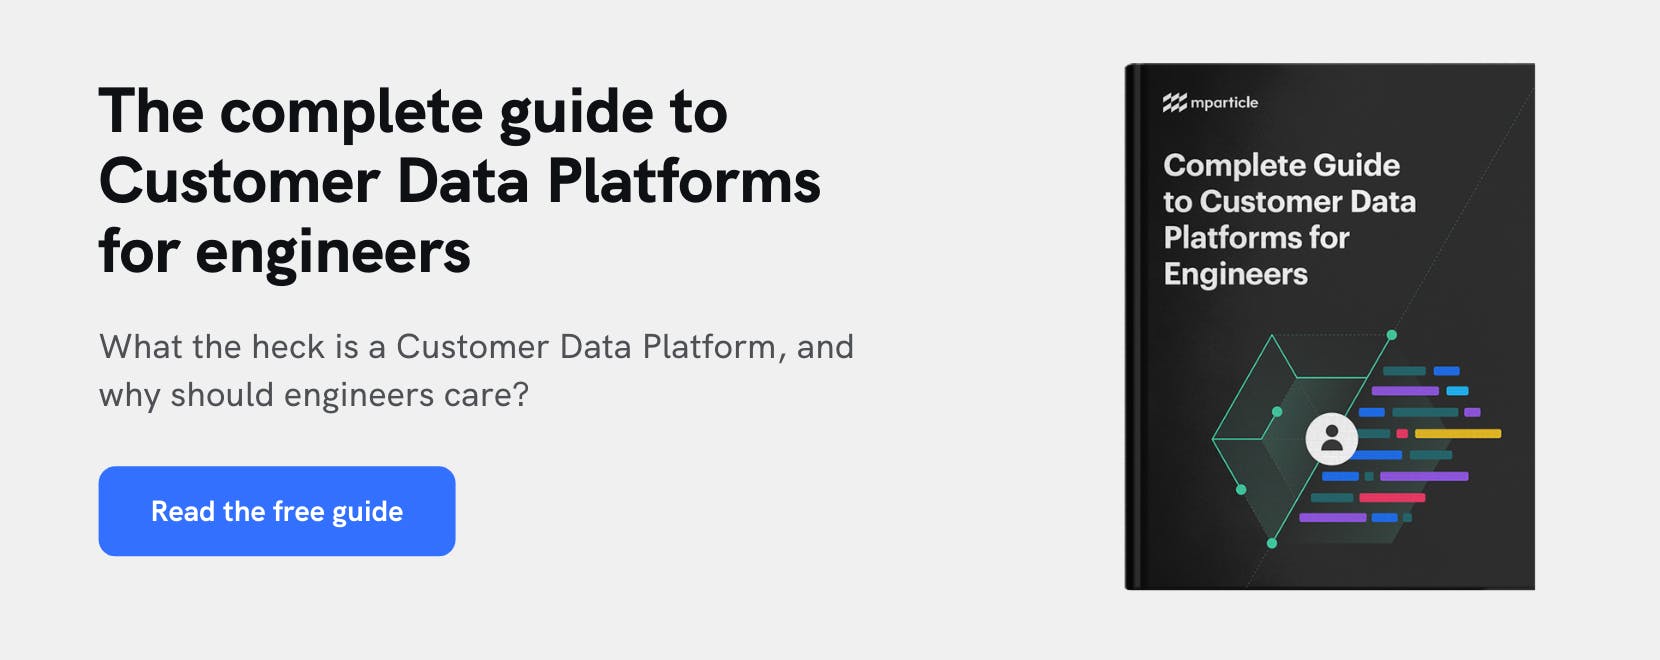 complete-guide-to-data-platforms-for-engineers